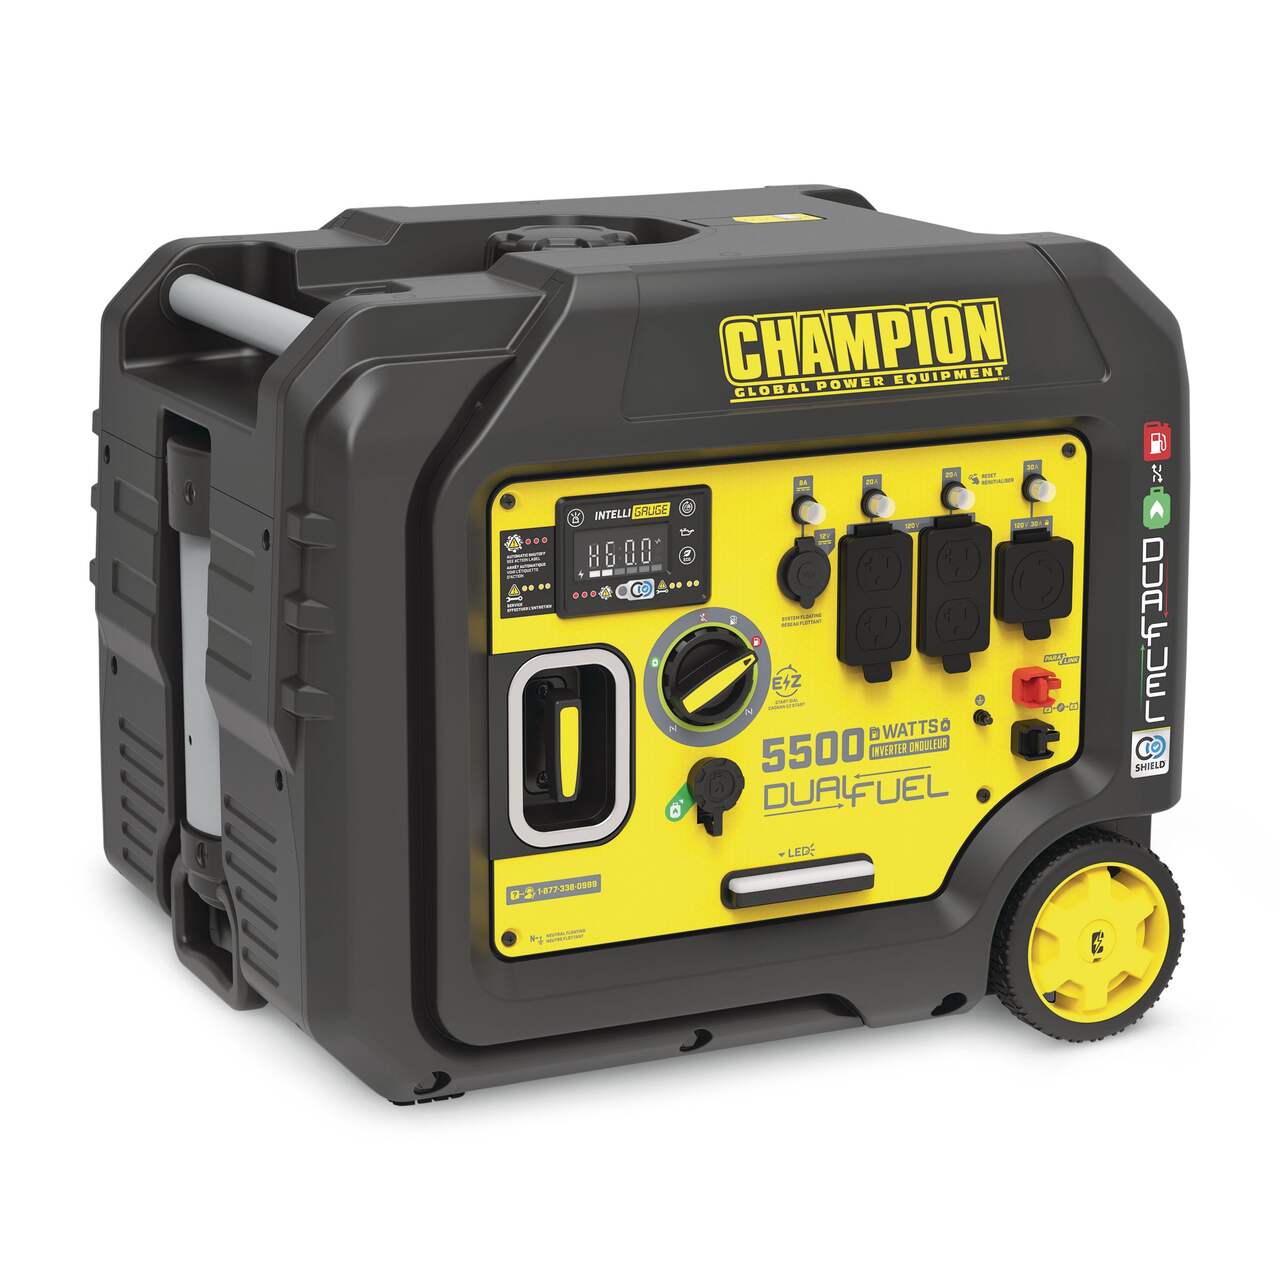 https://media-www.canadiantire.ca/product/seasonal-gardening/outdoor-tools/power-creation/0550388/champion-4000w-dual-fuel-inverter-generator-1c68226d-fd52-4a1b-a43f-656ef5bcbe04-jpgrendition.jpg?imdensity=1&imwidth=640&impolicy=mZoom